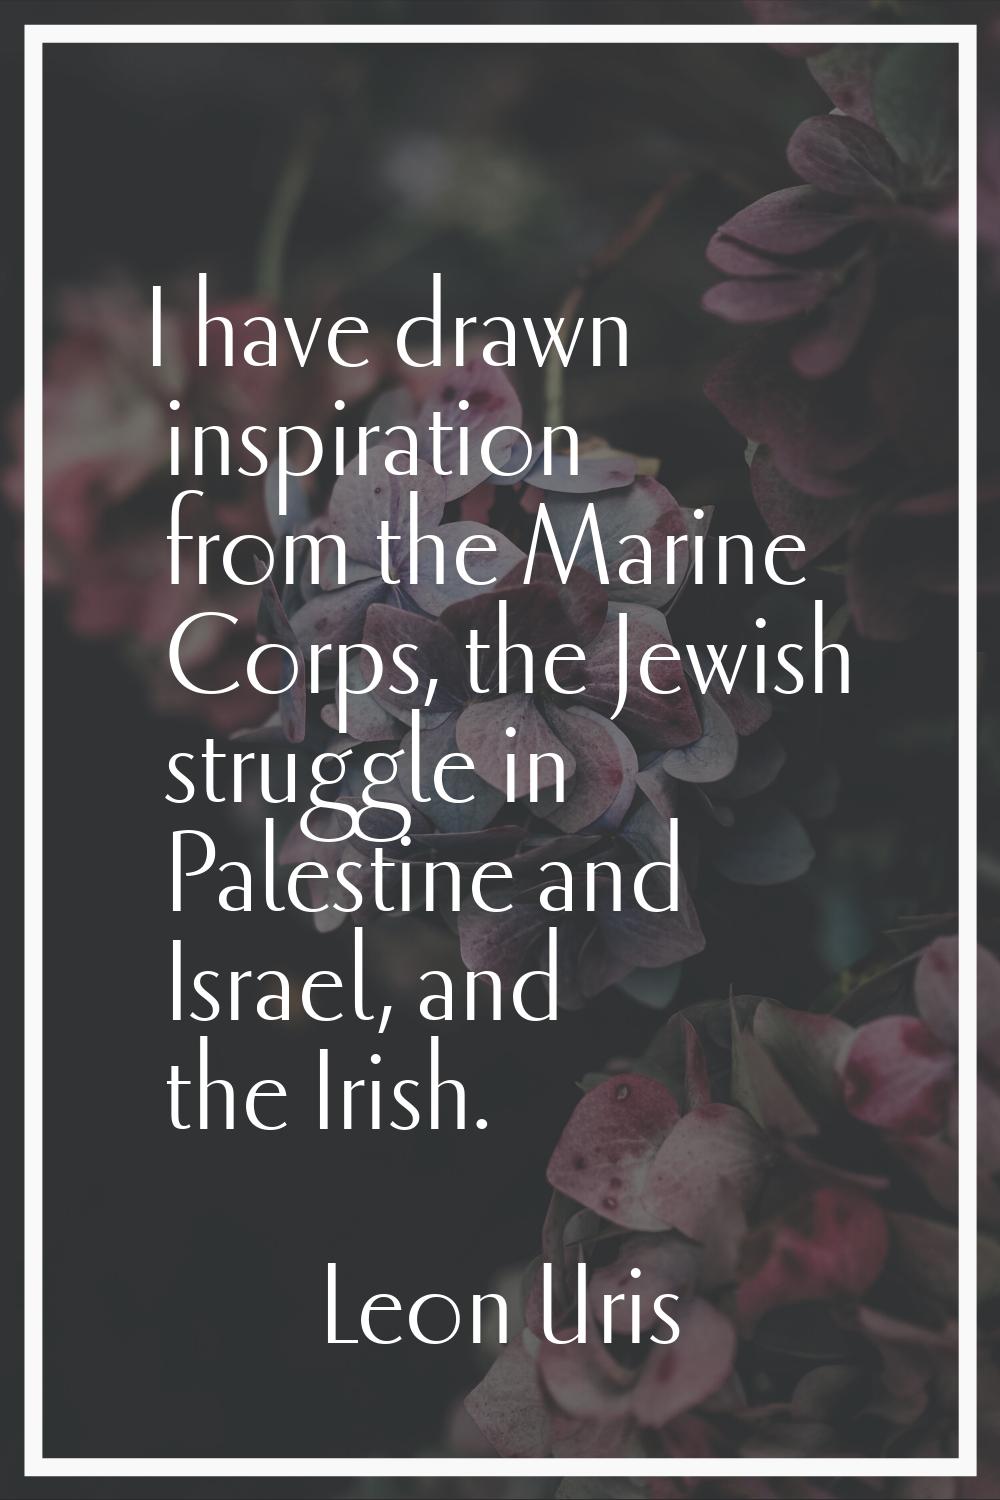 I have drawn inspiration from the Marine Corps, the Jewish struggle in Palestine and Israel, and th